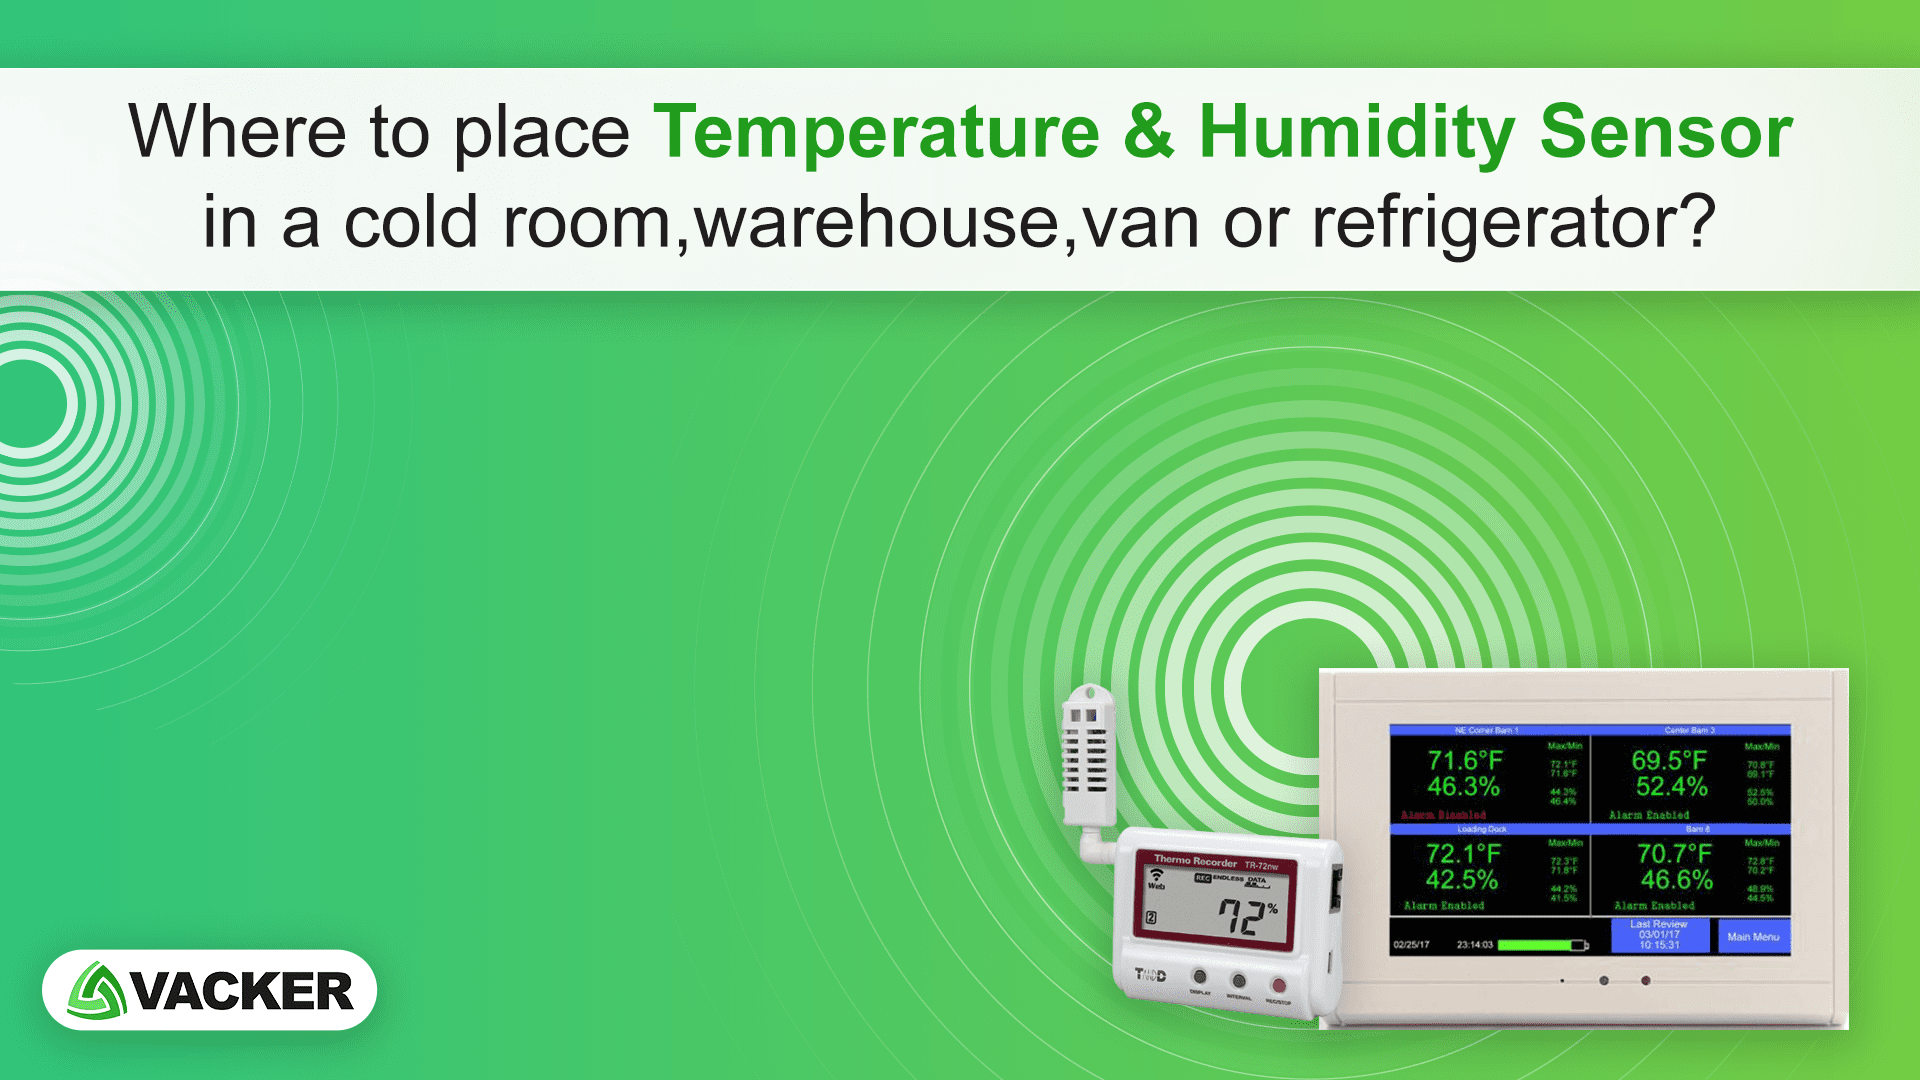 Location of temperature & humidity sensors in a cold room